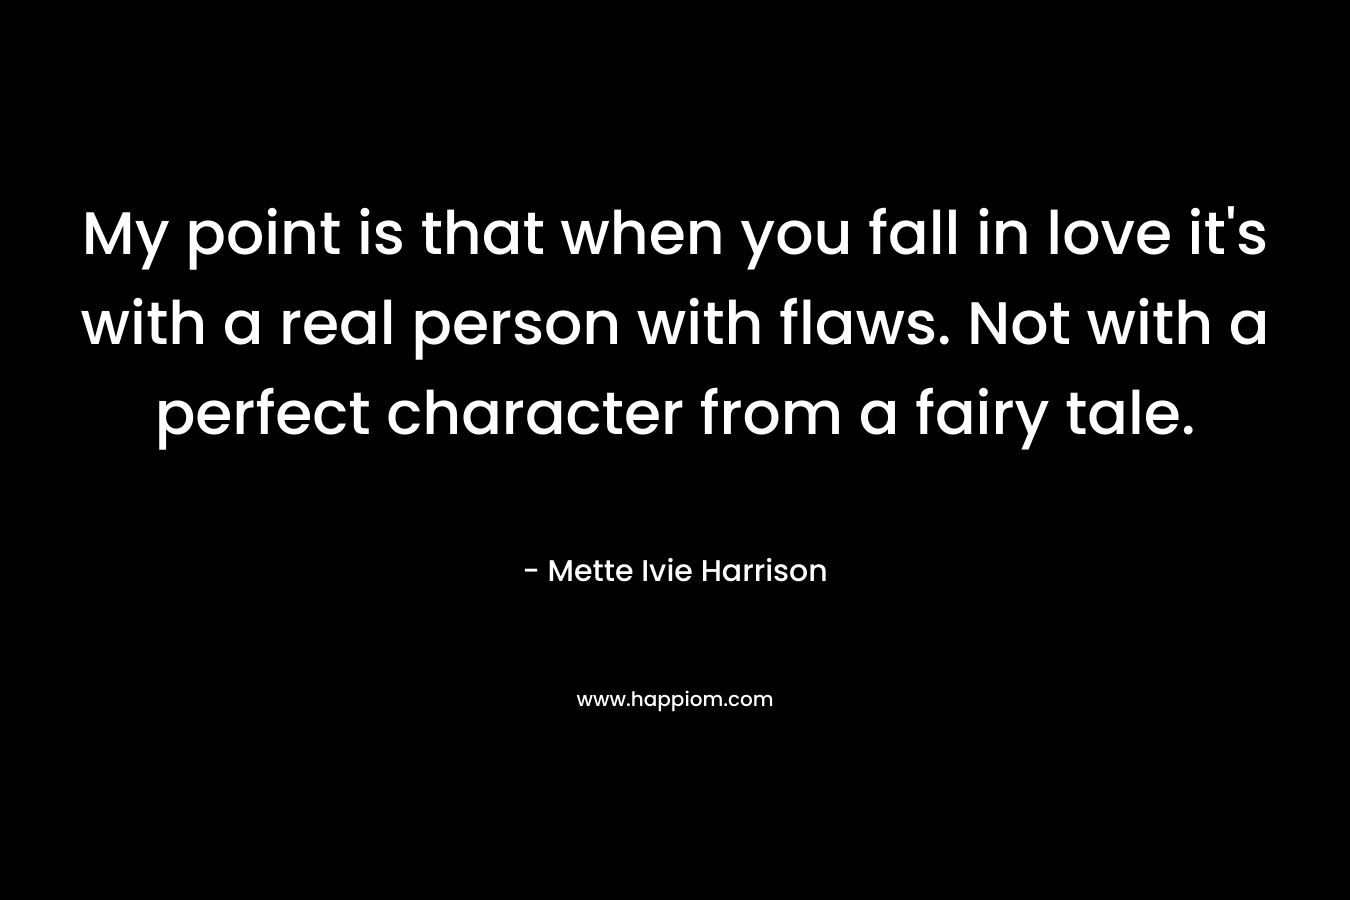 My point is that when you fall in love it’s with a real person with flaws. Not with a perfect character from a fairy tale. – Mette Ivie Harrison